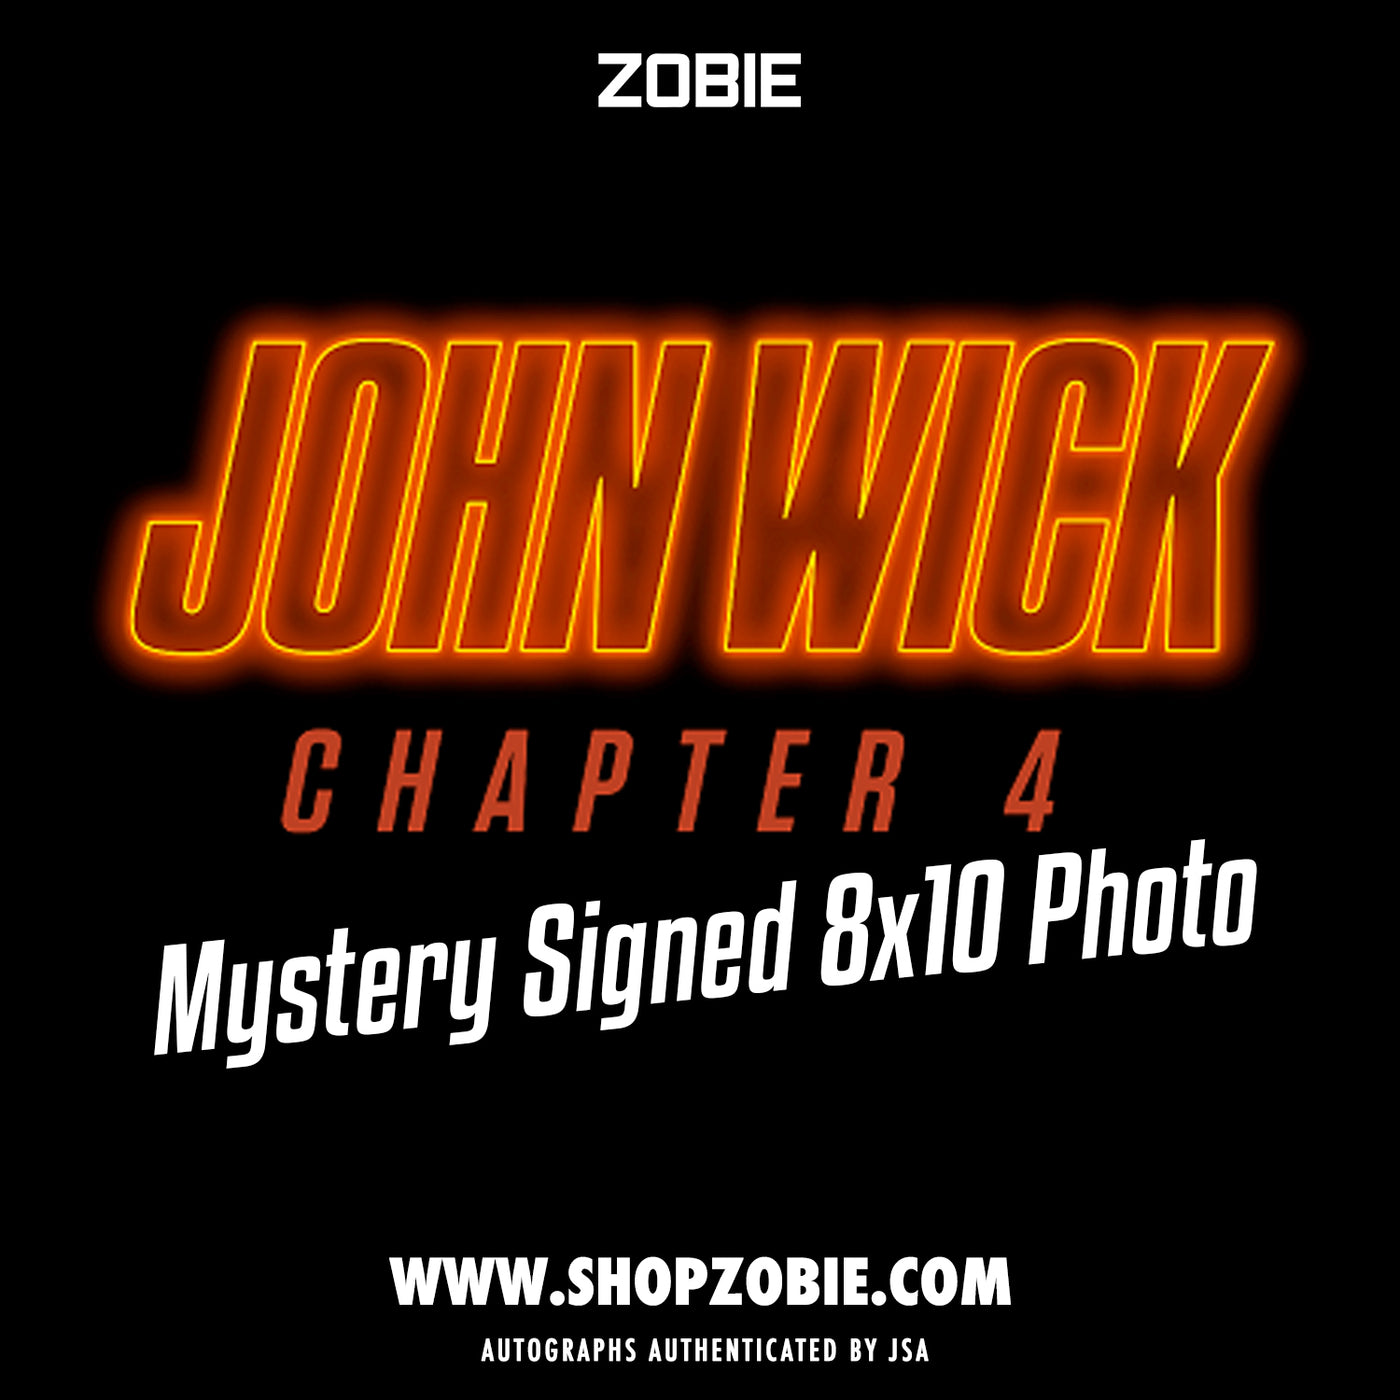 SPECIAL John Wick 4 Signed Mystery 8x10 Photo